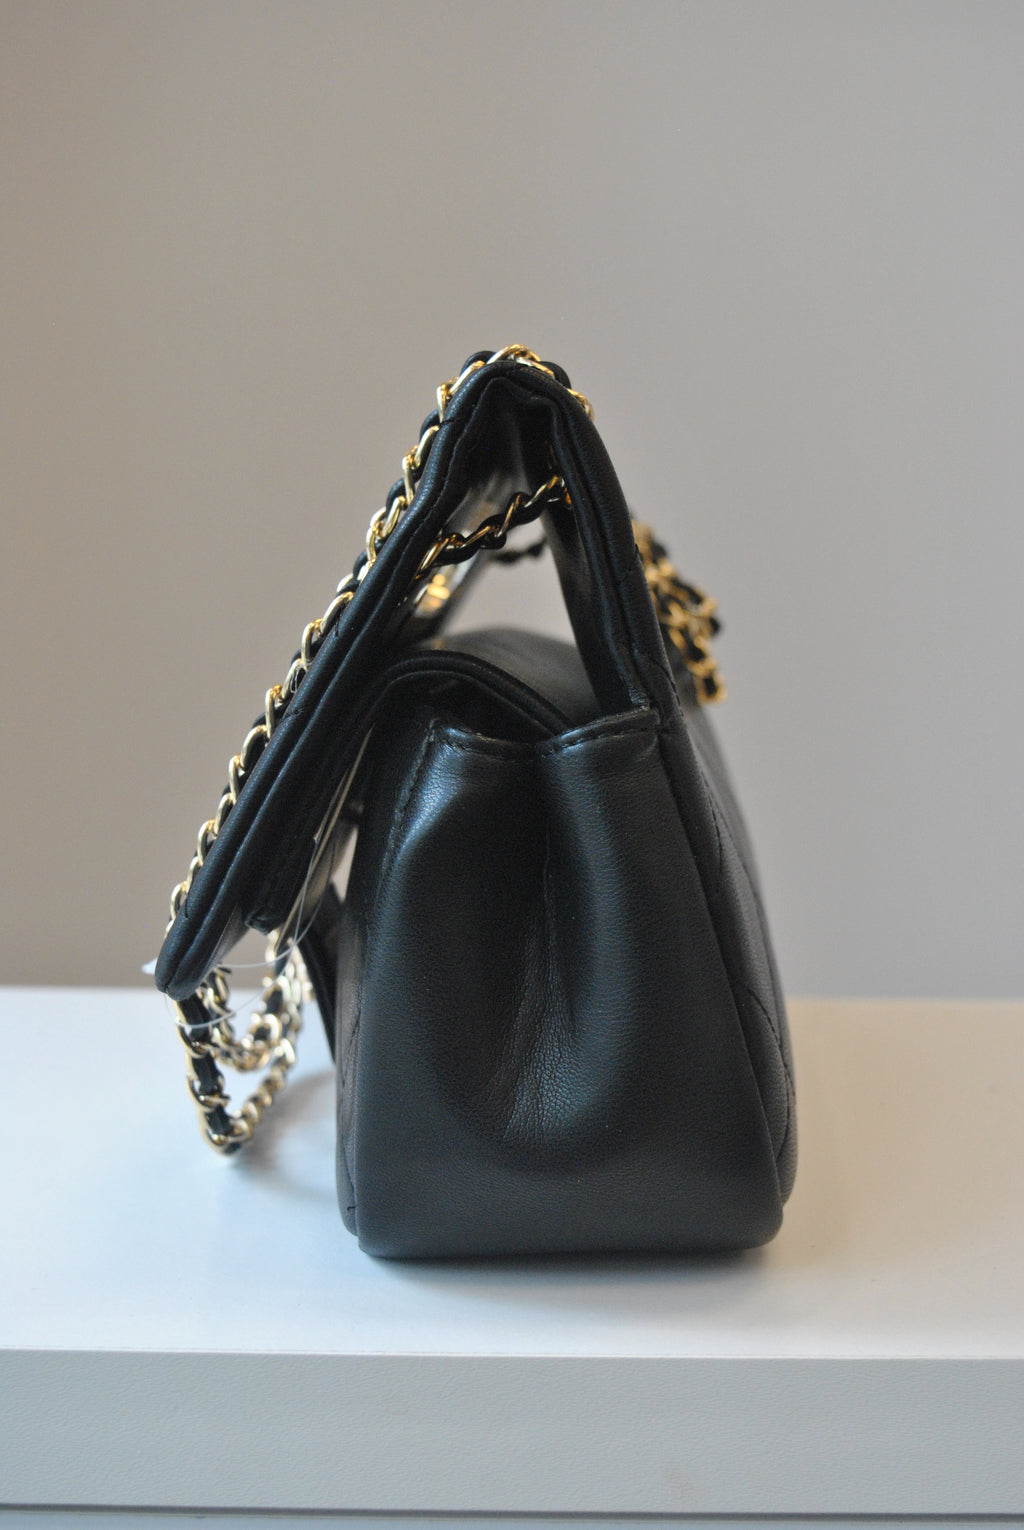 BLACK GUILTED HANDBAG WITH CUTOFF  HANDLE AND GOLD CHAIN